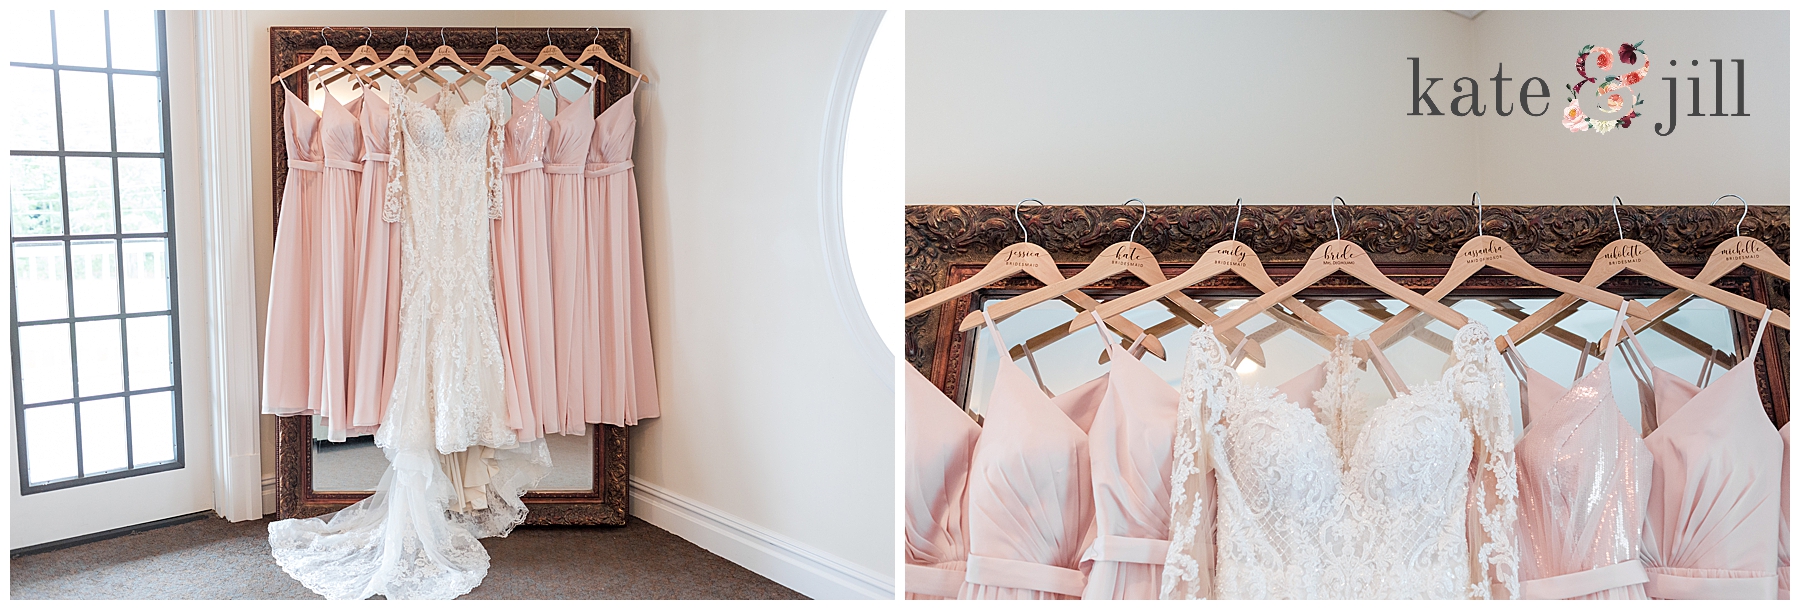 bride and bridesmaids dresses The Carriage House